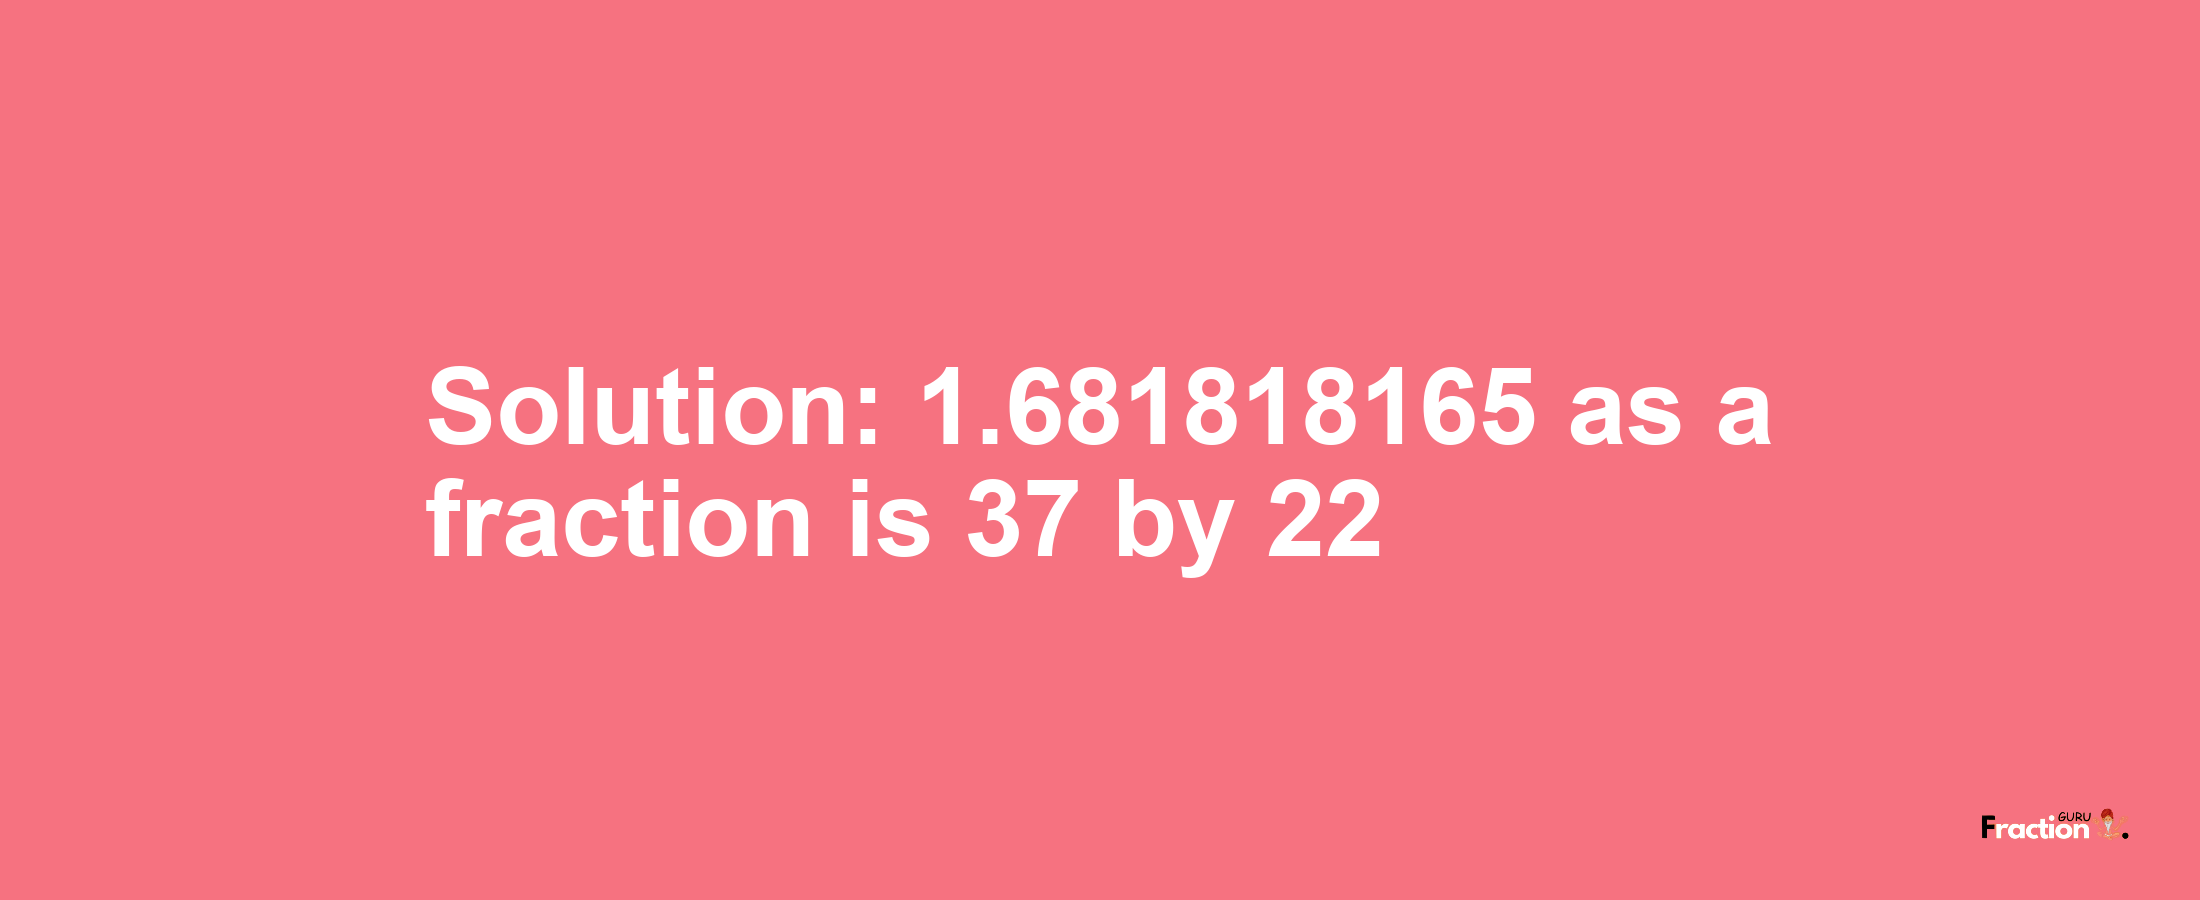 Solution:1.681818165 as a fraction is 37/22